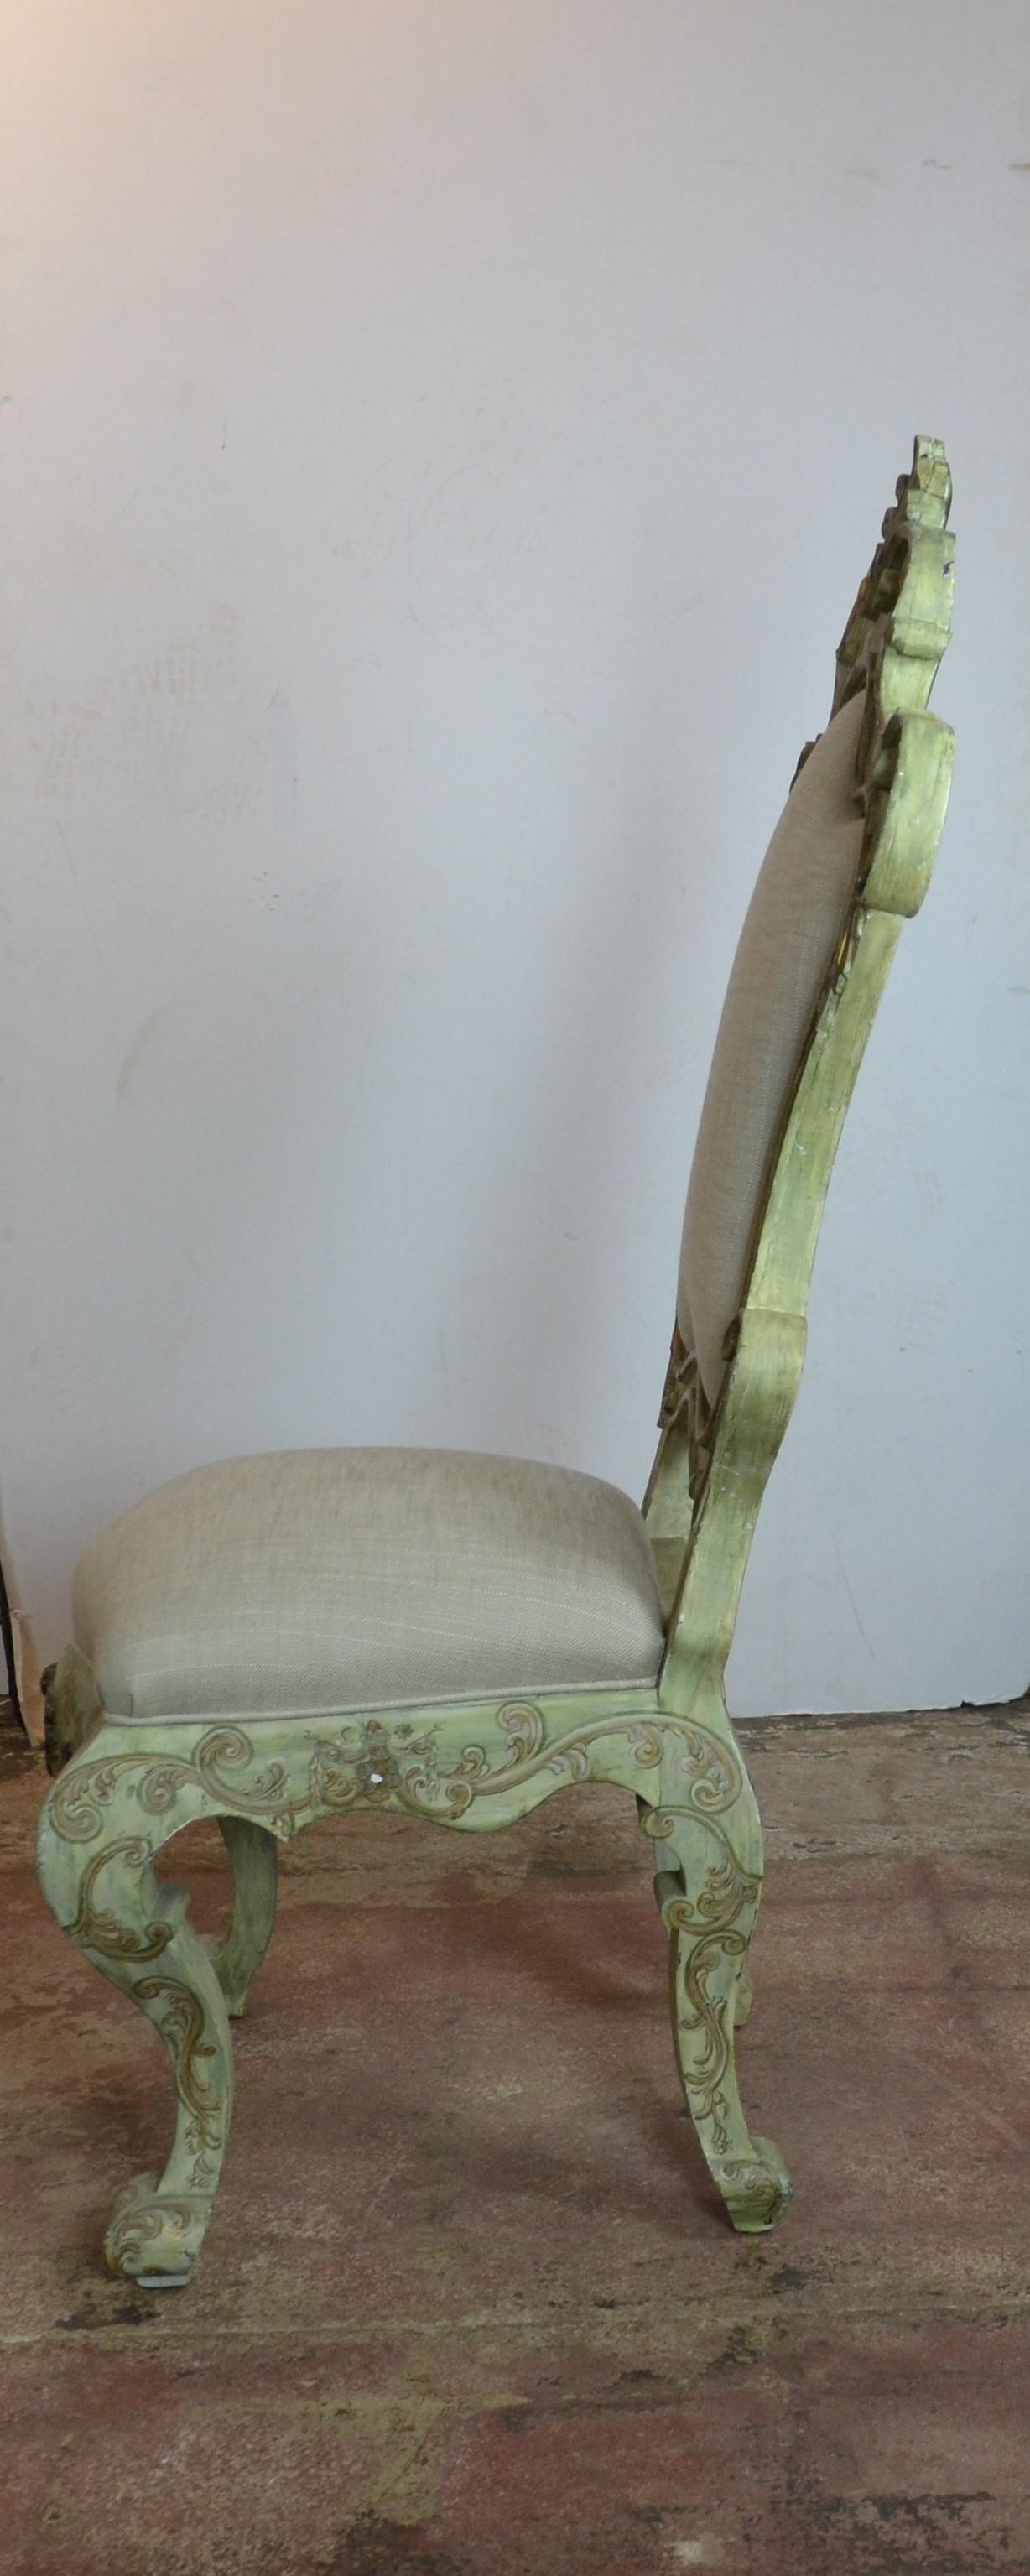 Painted Italian Chairs Set of 2 2